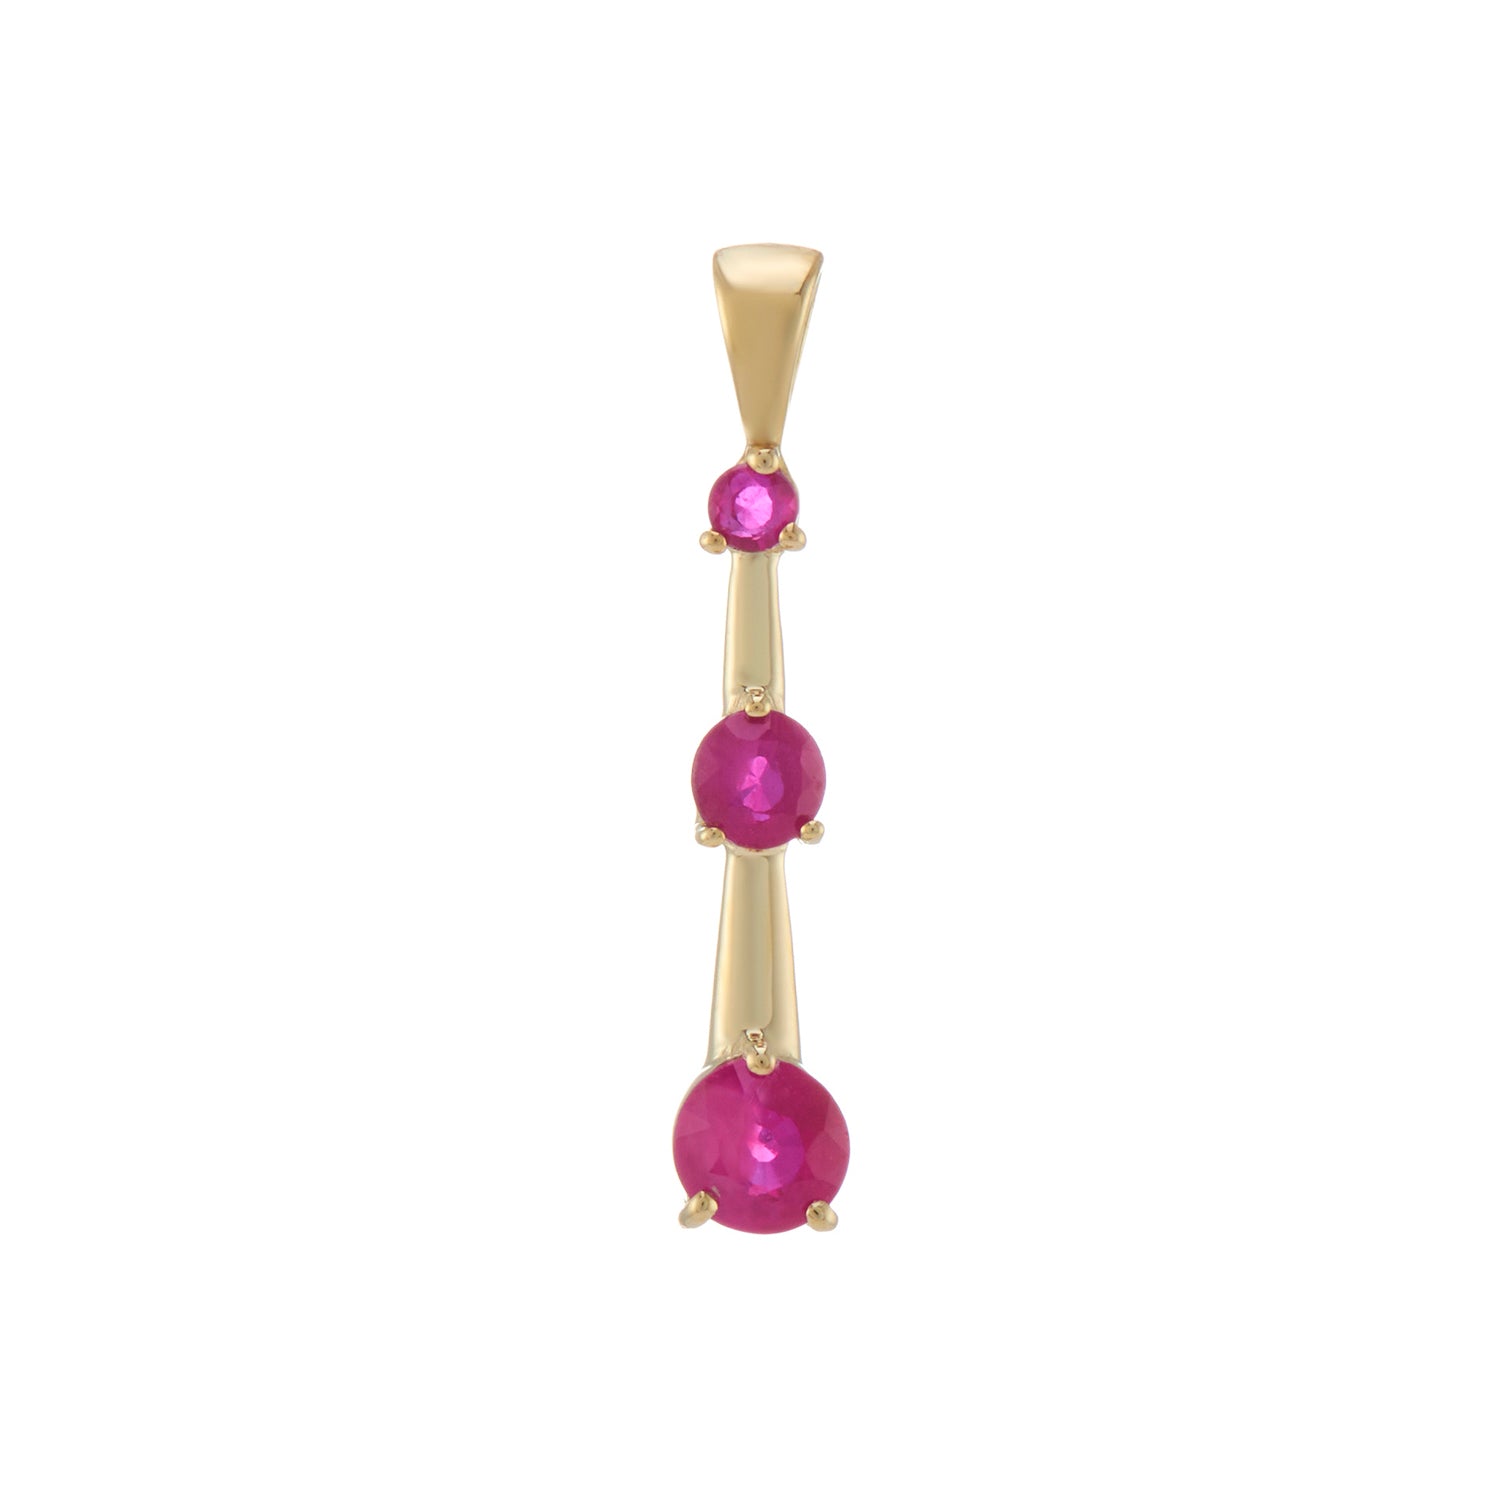 9ct gold triple round ruby (2,3 & 4mm) pendant